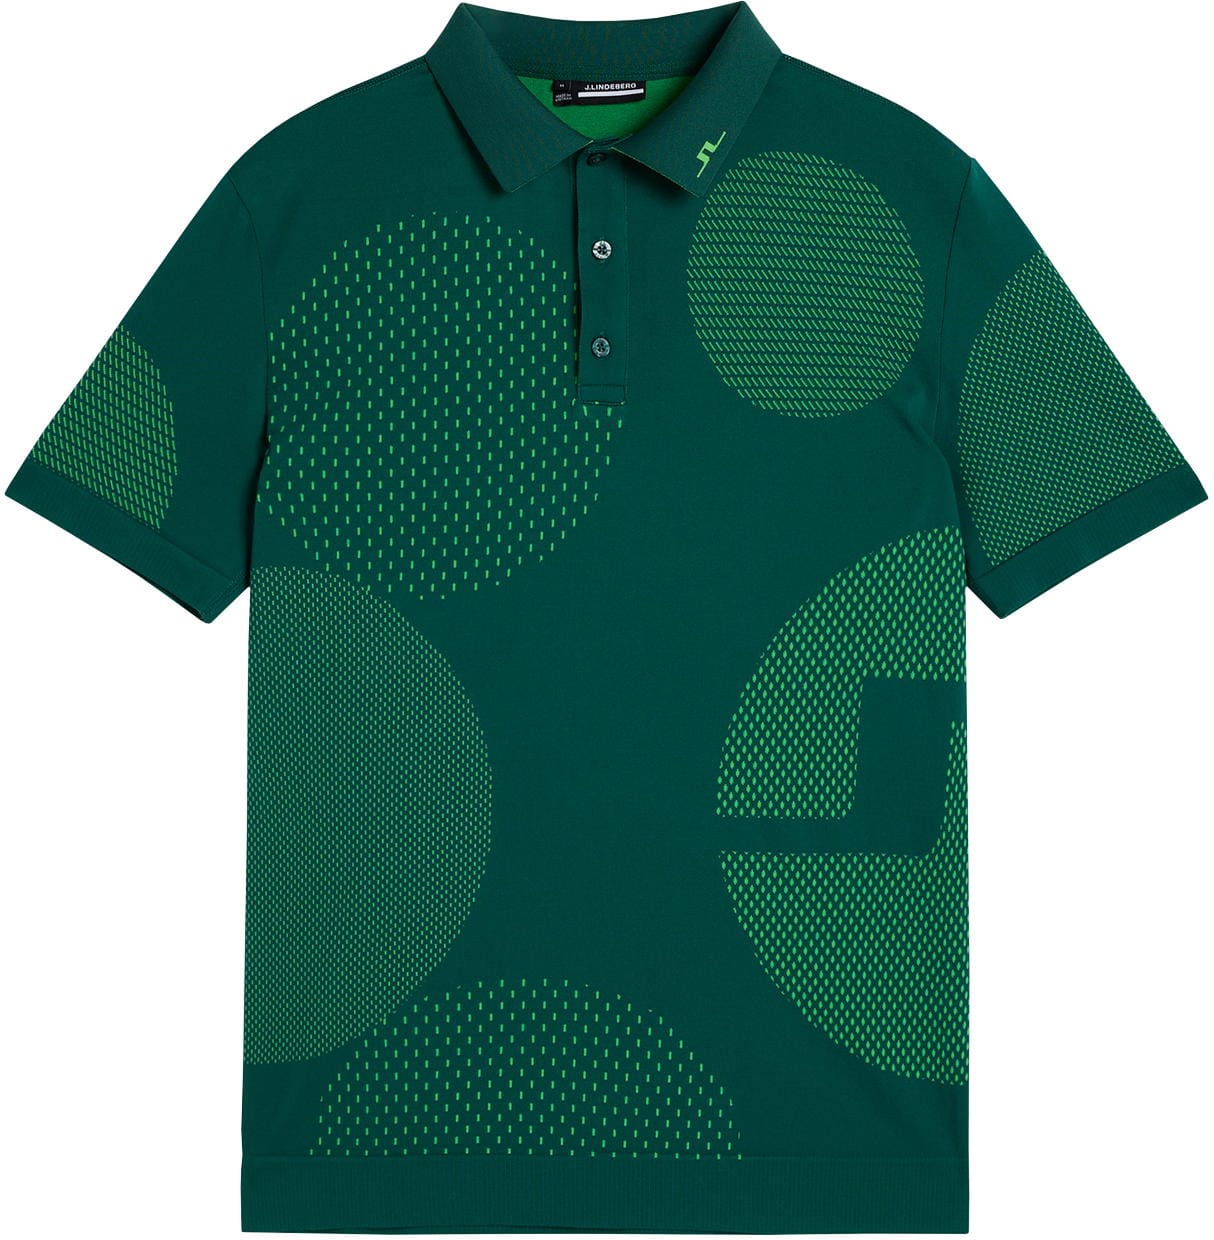 J.Lindeberg Nate Seamless Polo, rain forest/classic green